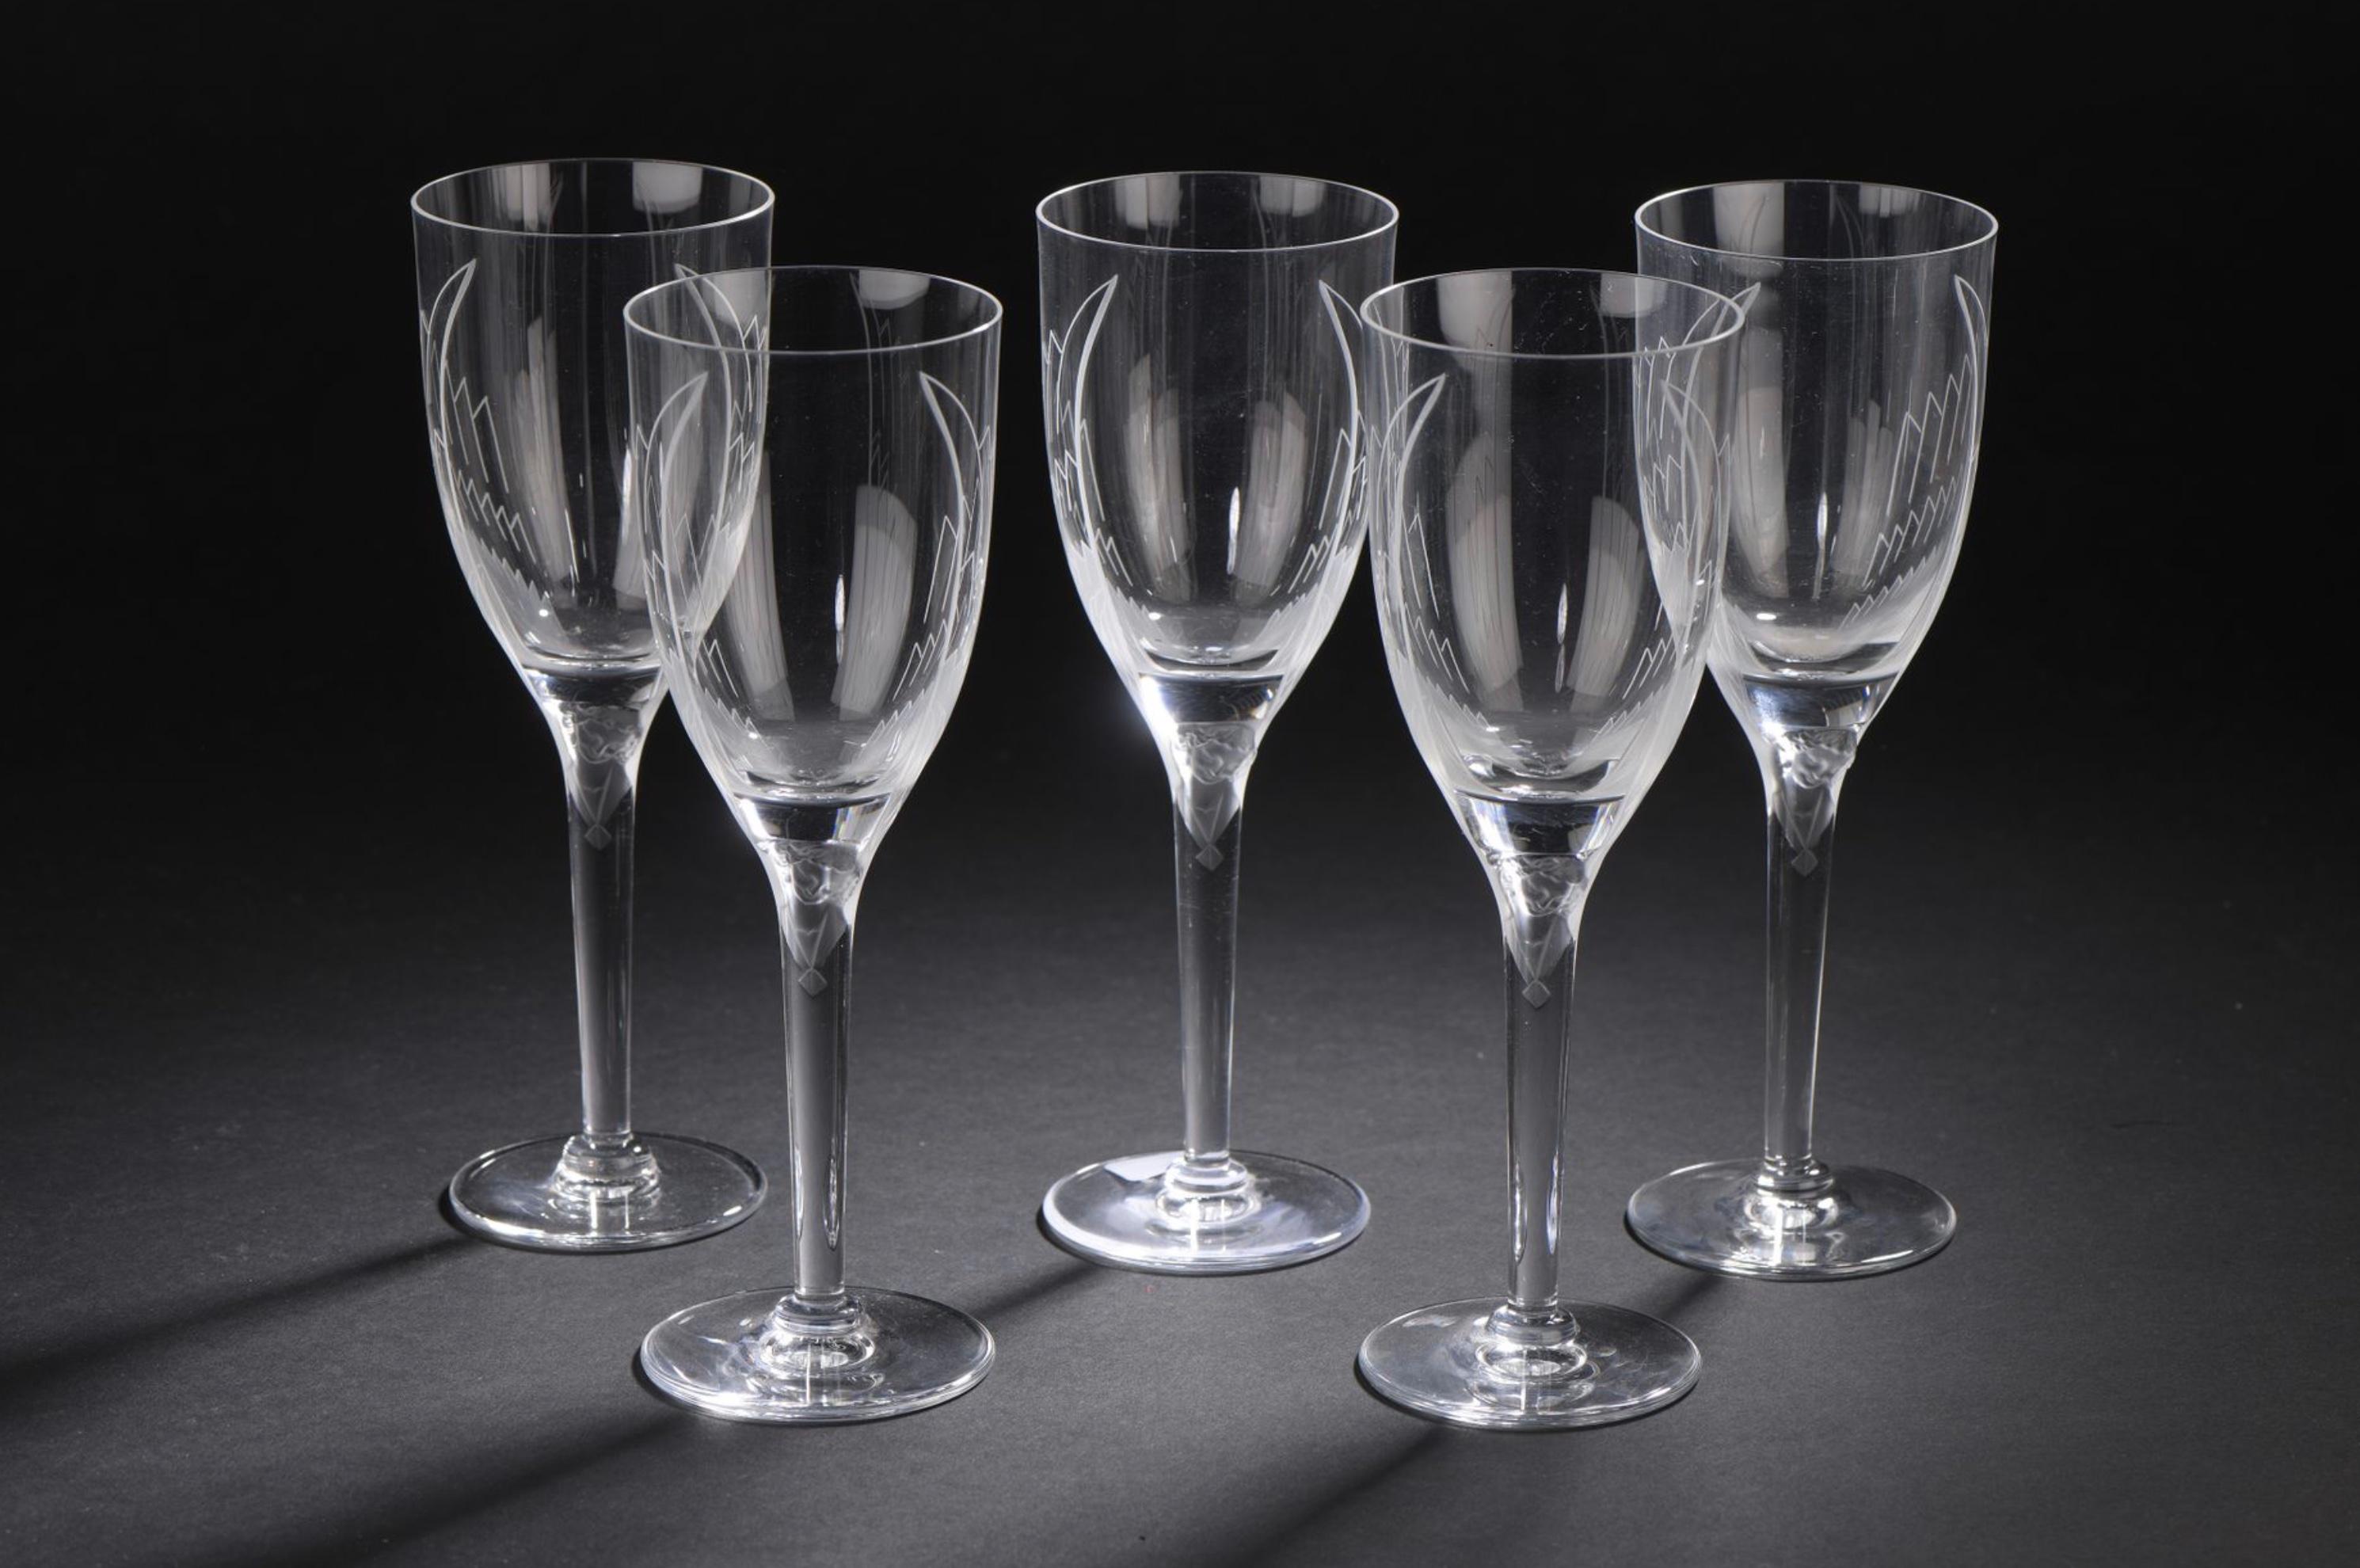 Crystal editions crystal Lalique
Marc Lalique (1900-1977).
A glass with champagne, 